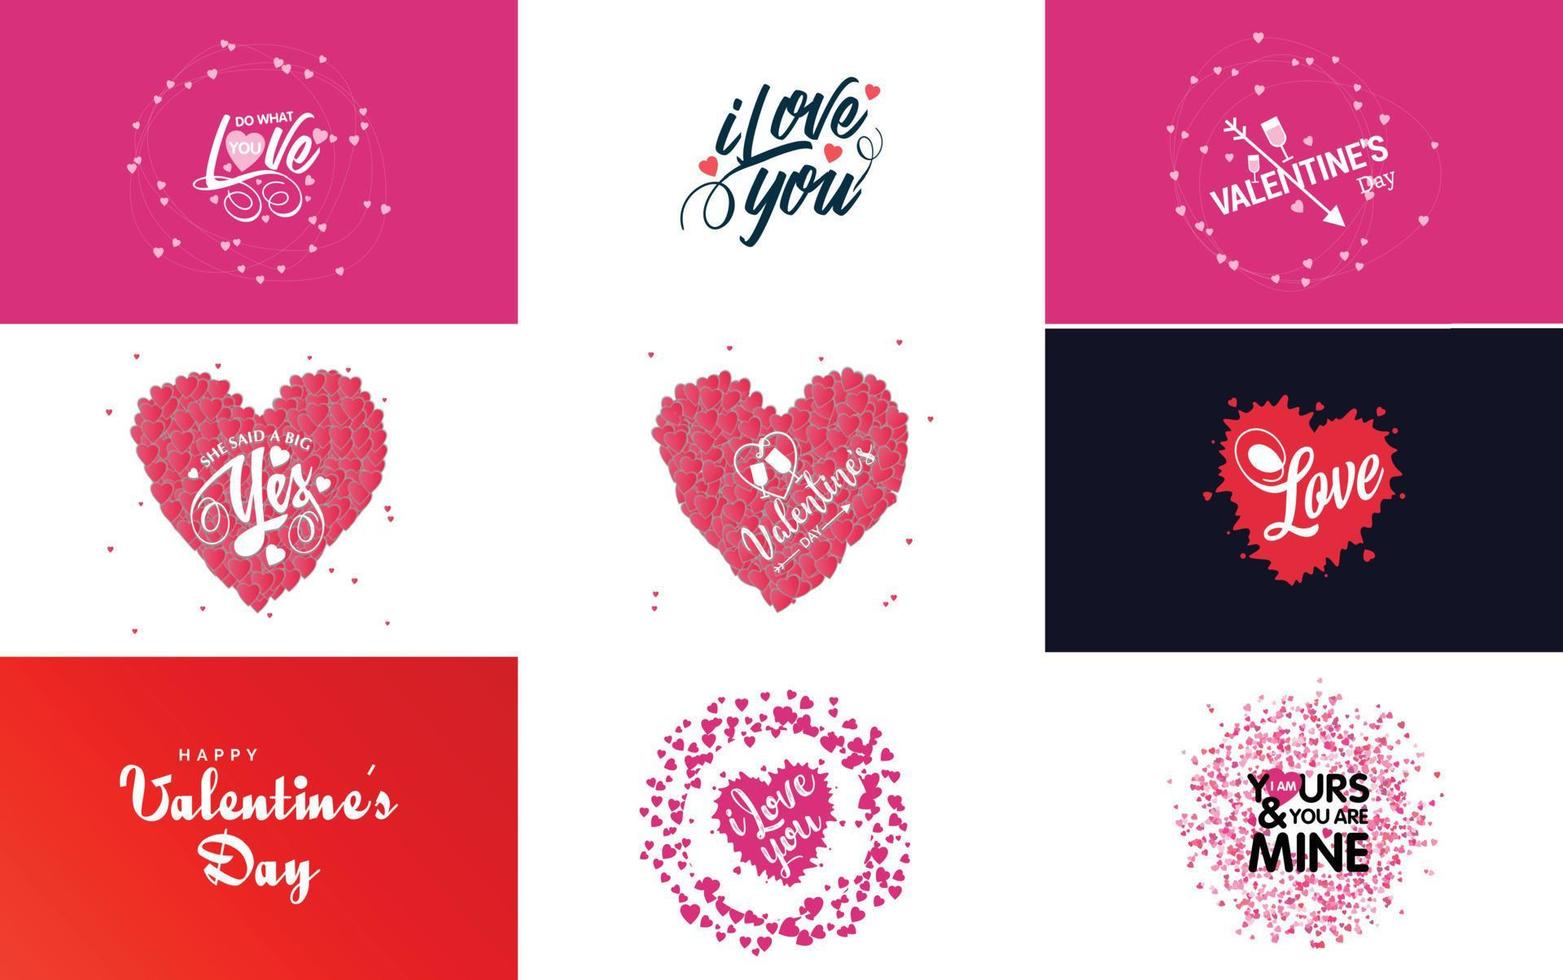 I Love You hand-drawn lettering and calligraphy with a heart design. suitable for use as a Valentine's Day greeting vector